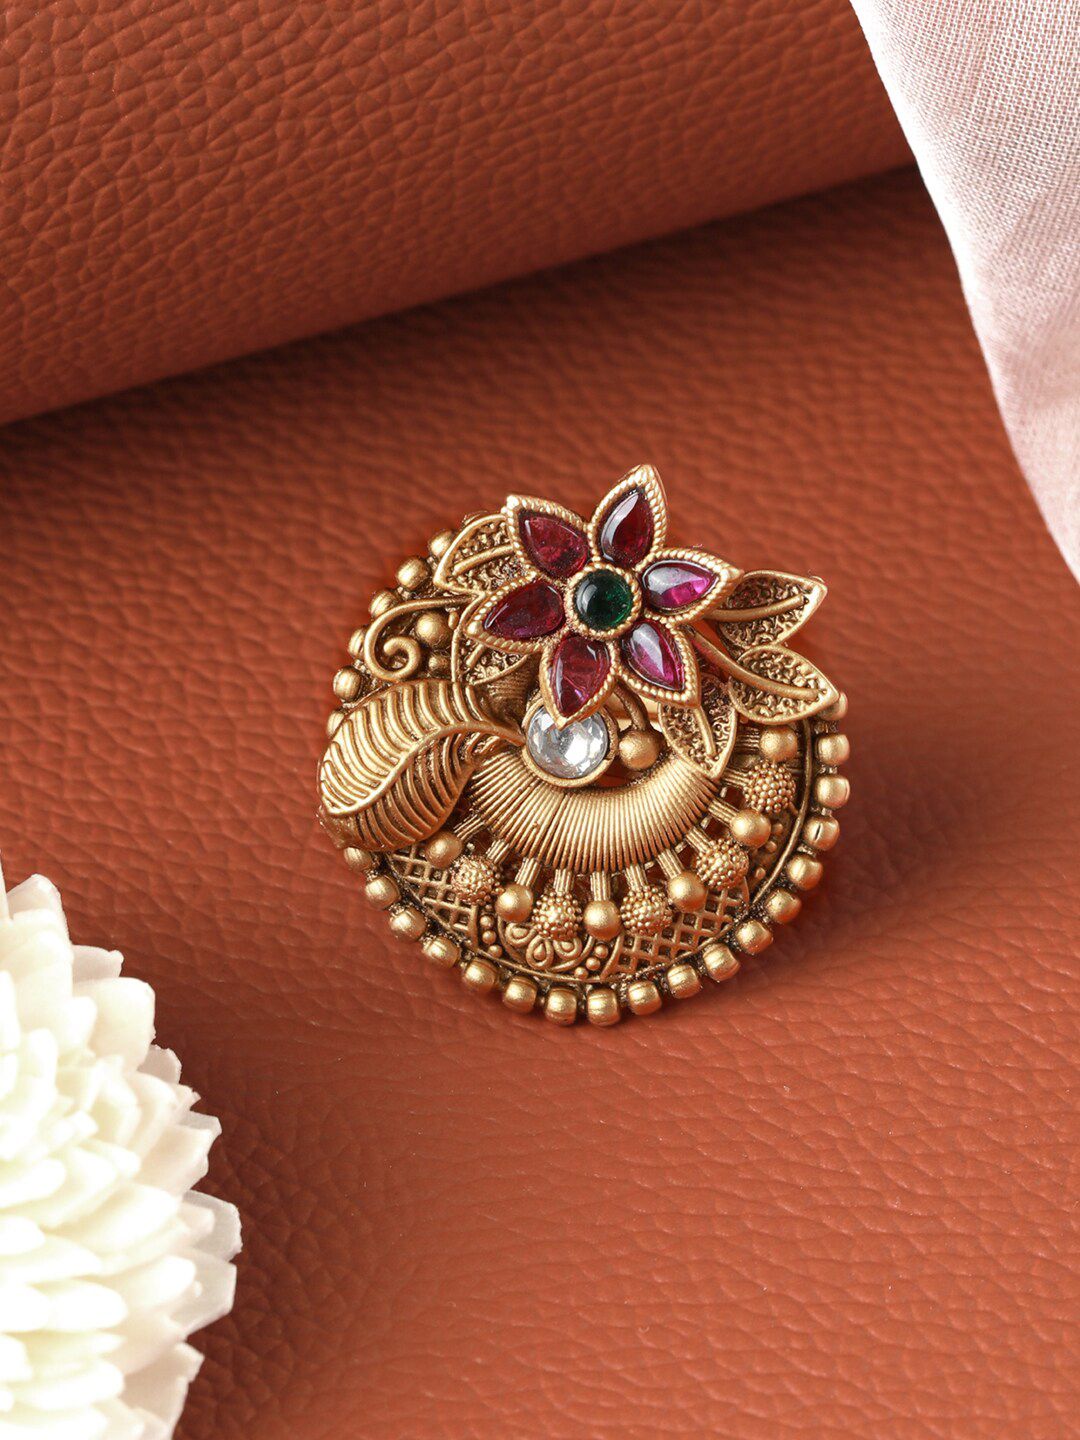 Priyaasi Gold-Plated White & Pink Stone-Studded Adjustable Finger Ring Price in India